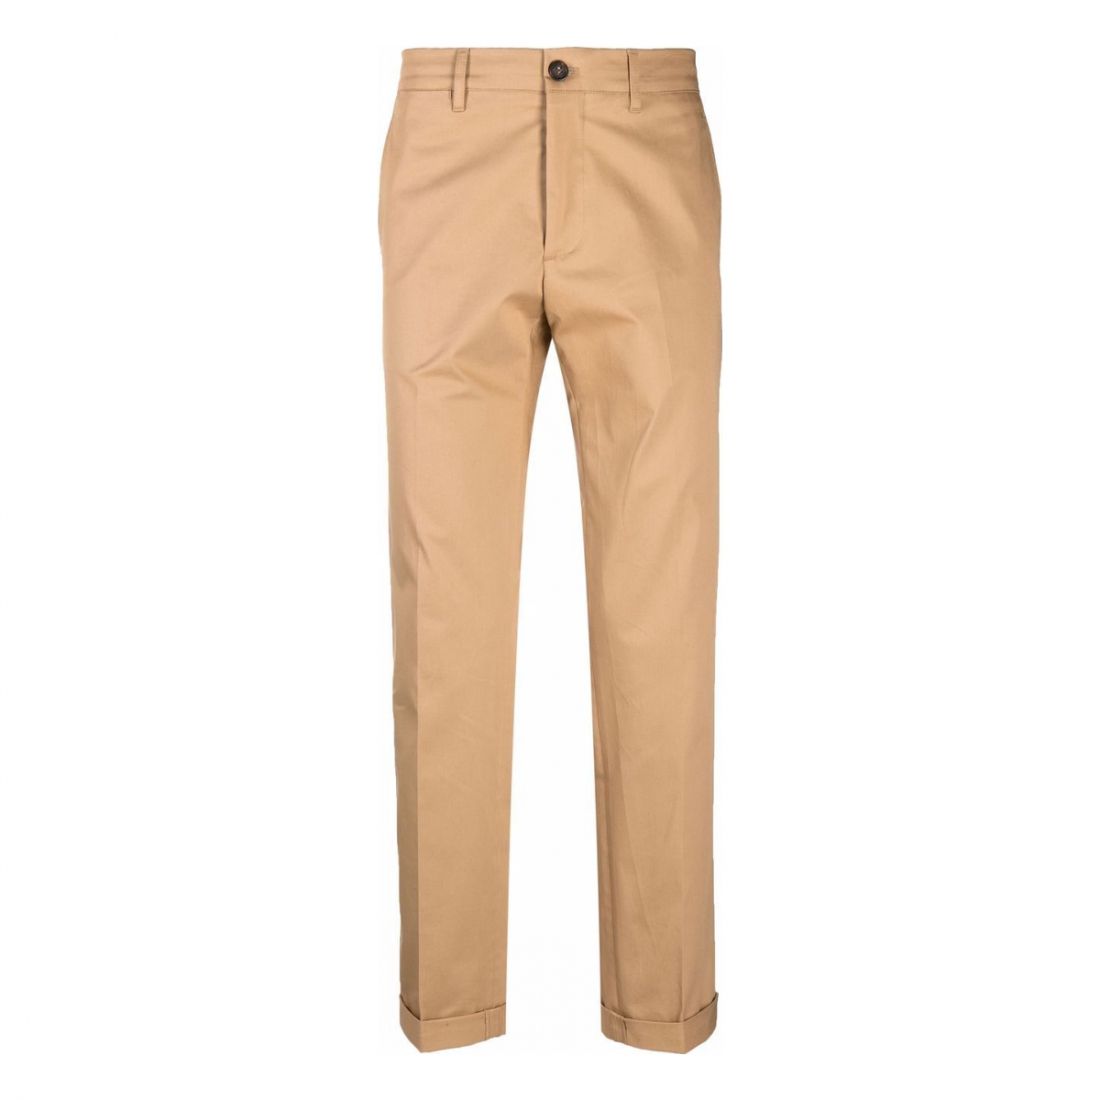 Golden Goose Deluxe Brand - Pantalon 'Pressed Crease Chinos' pour Hommes